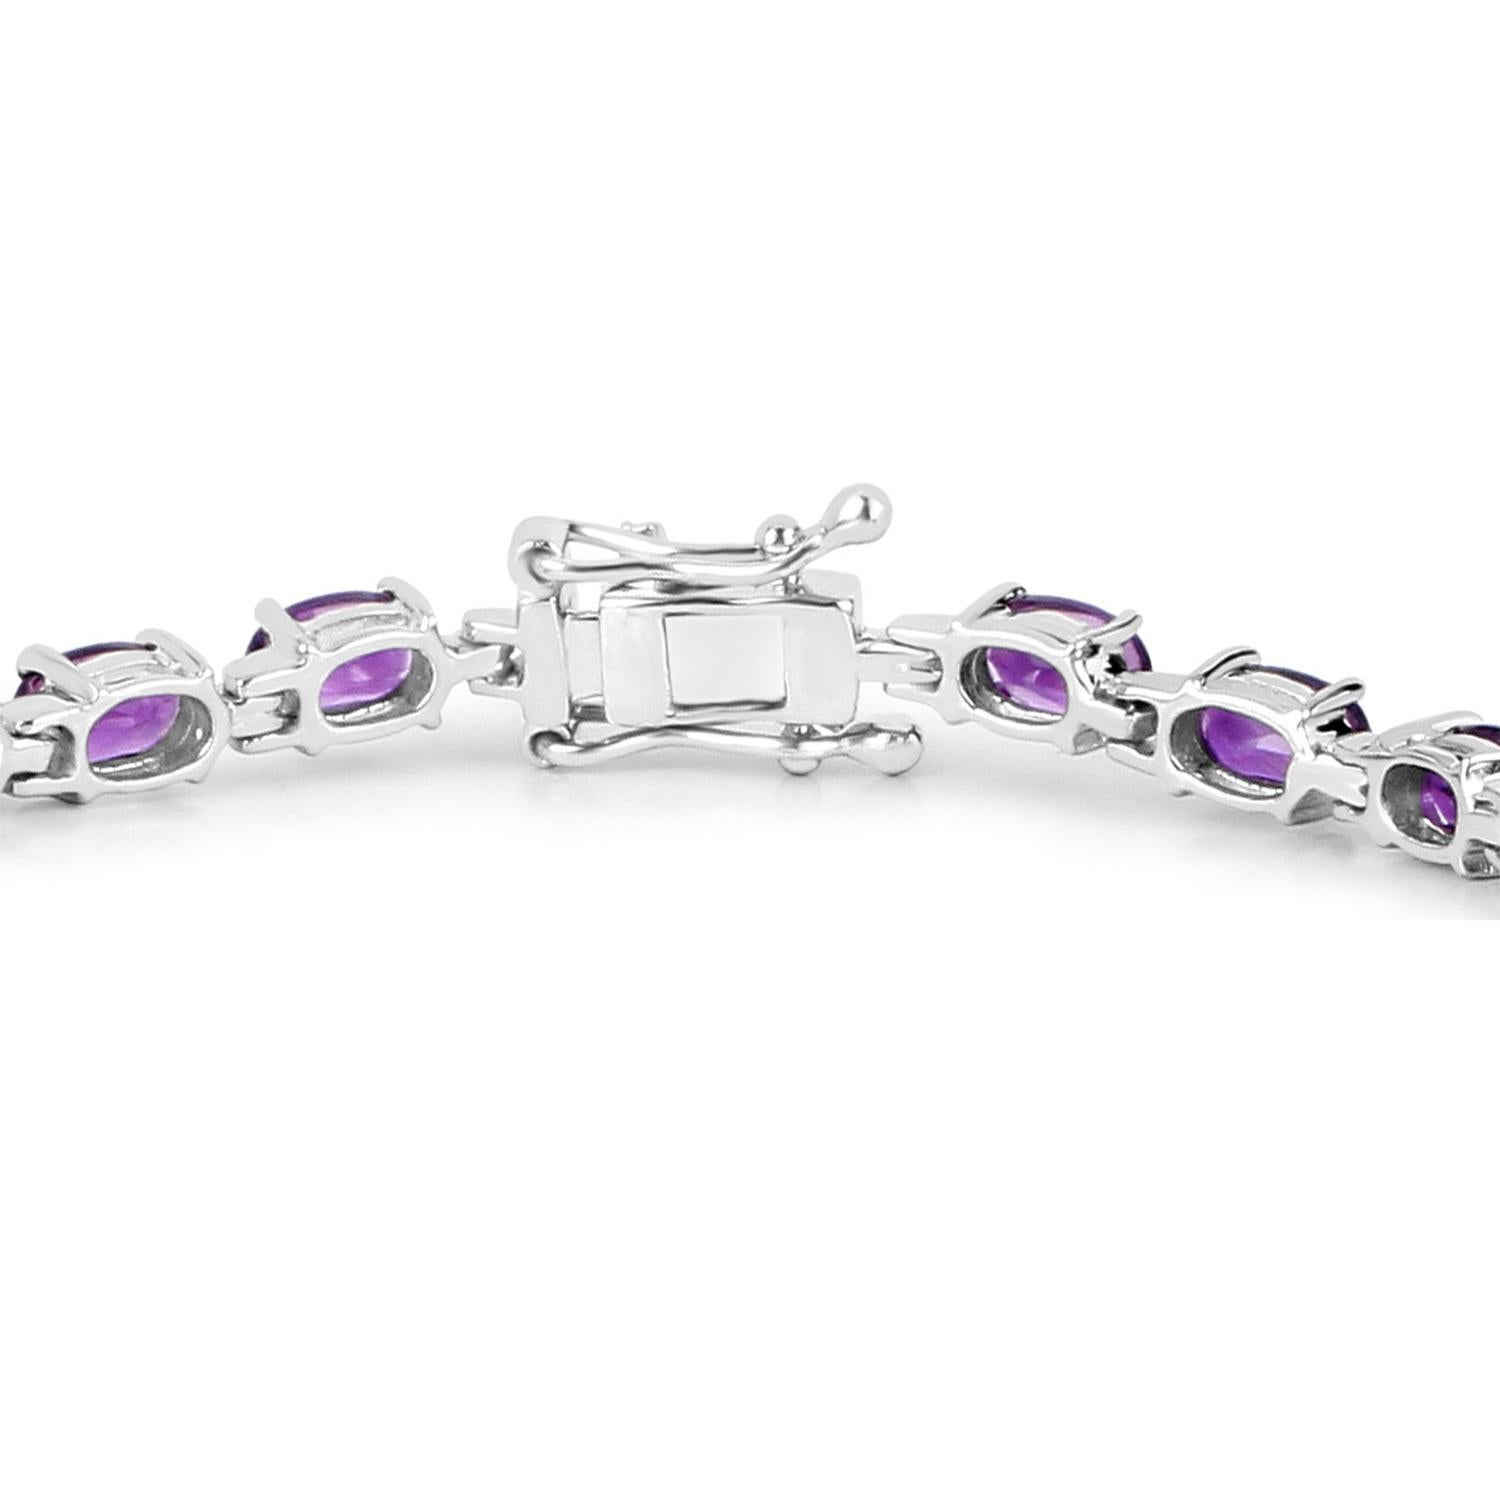 Oval Cut Amethyst Tennis Bracelet 7.98 Carats Rhodium Plated Sterling Silver For Sale